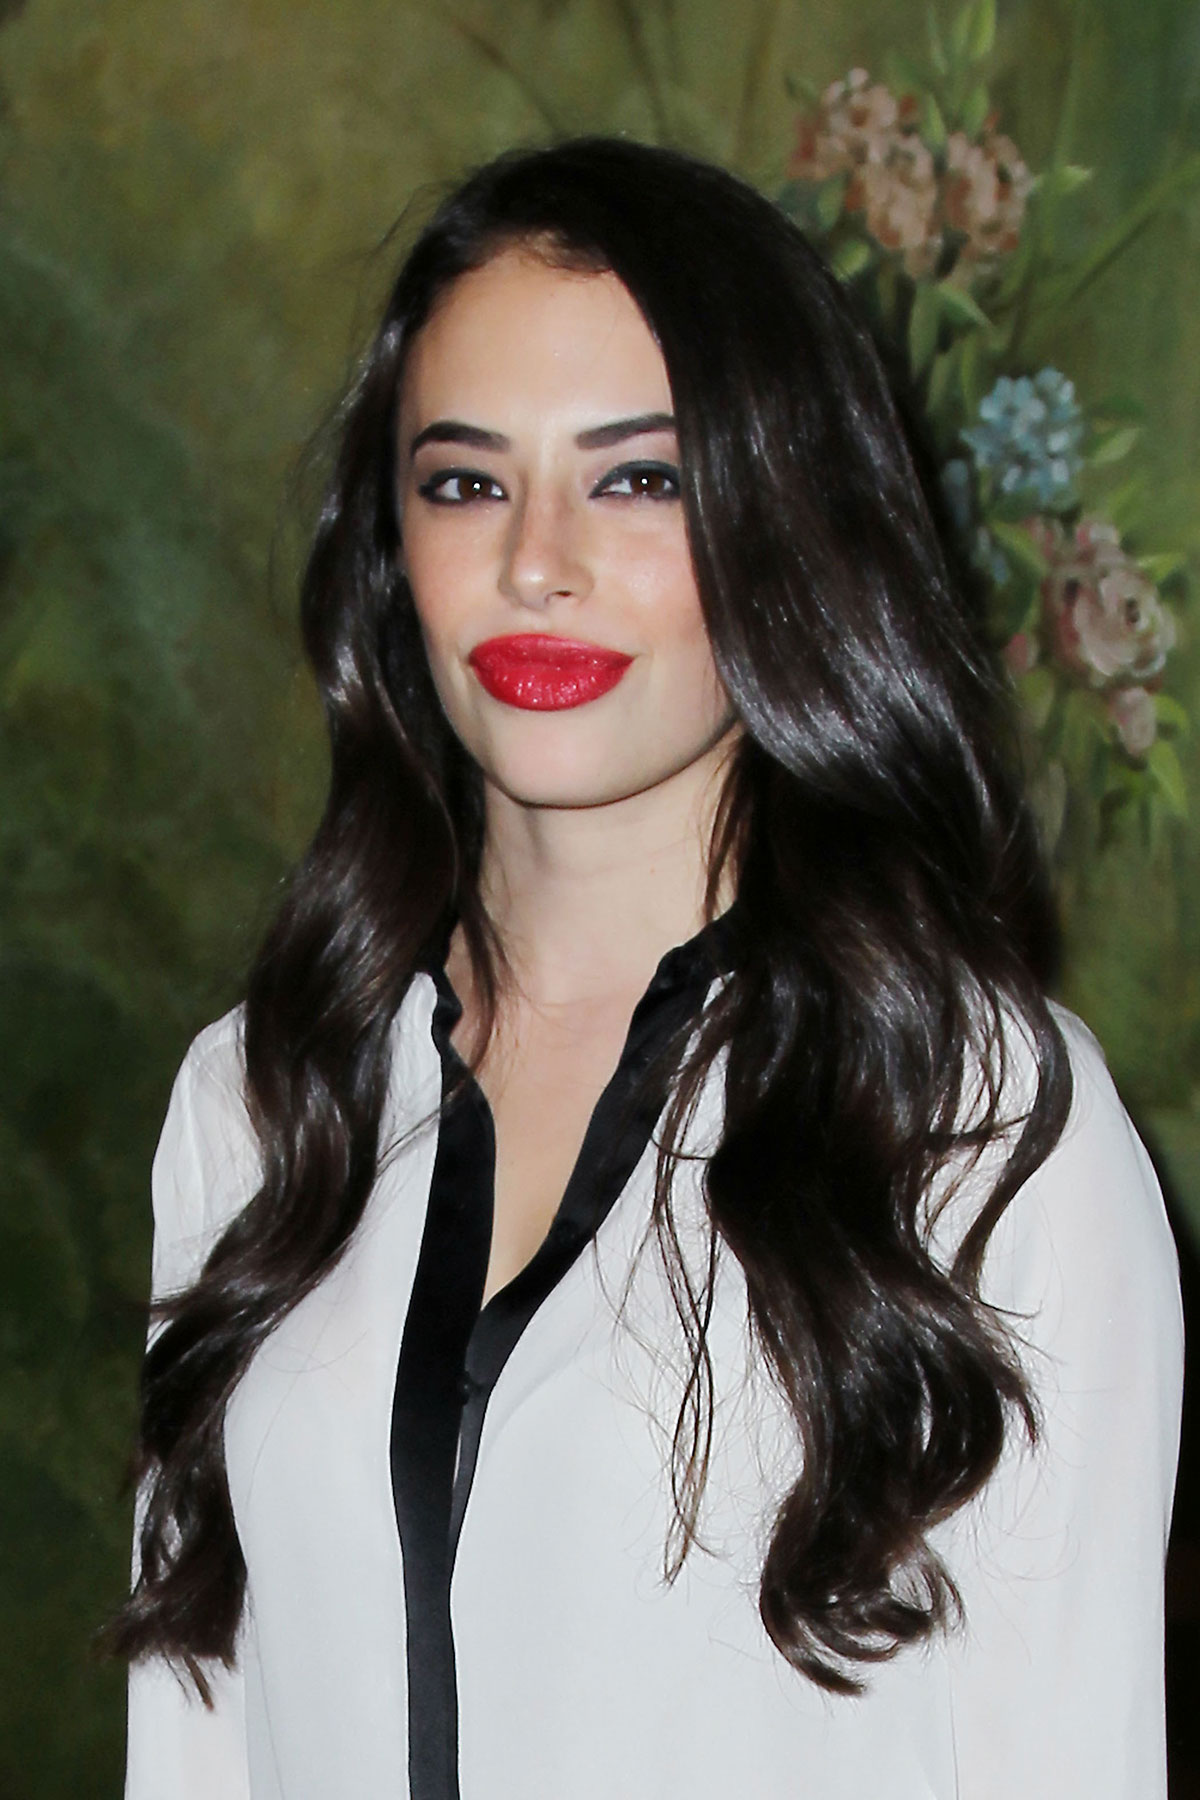 Chloe Bridges attends the Alice and Olivia by Stacey Bendet Spring 2015